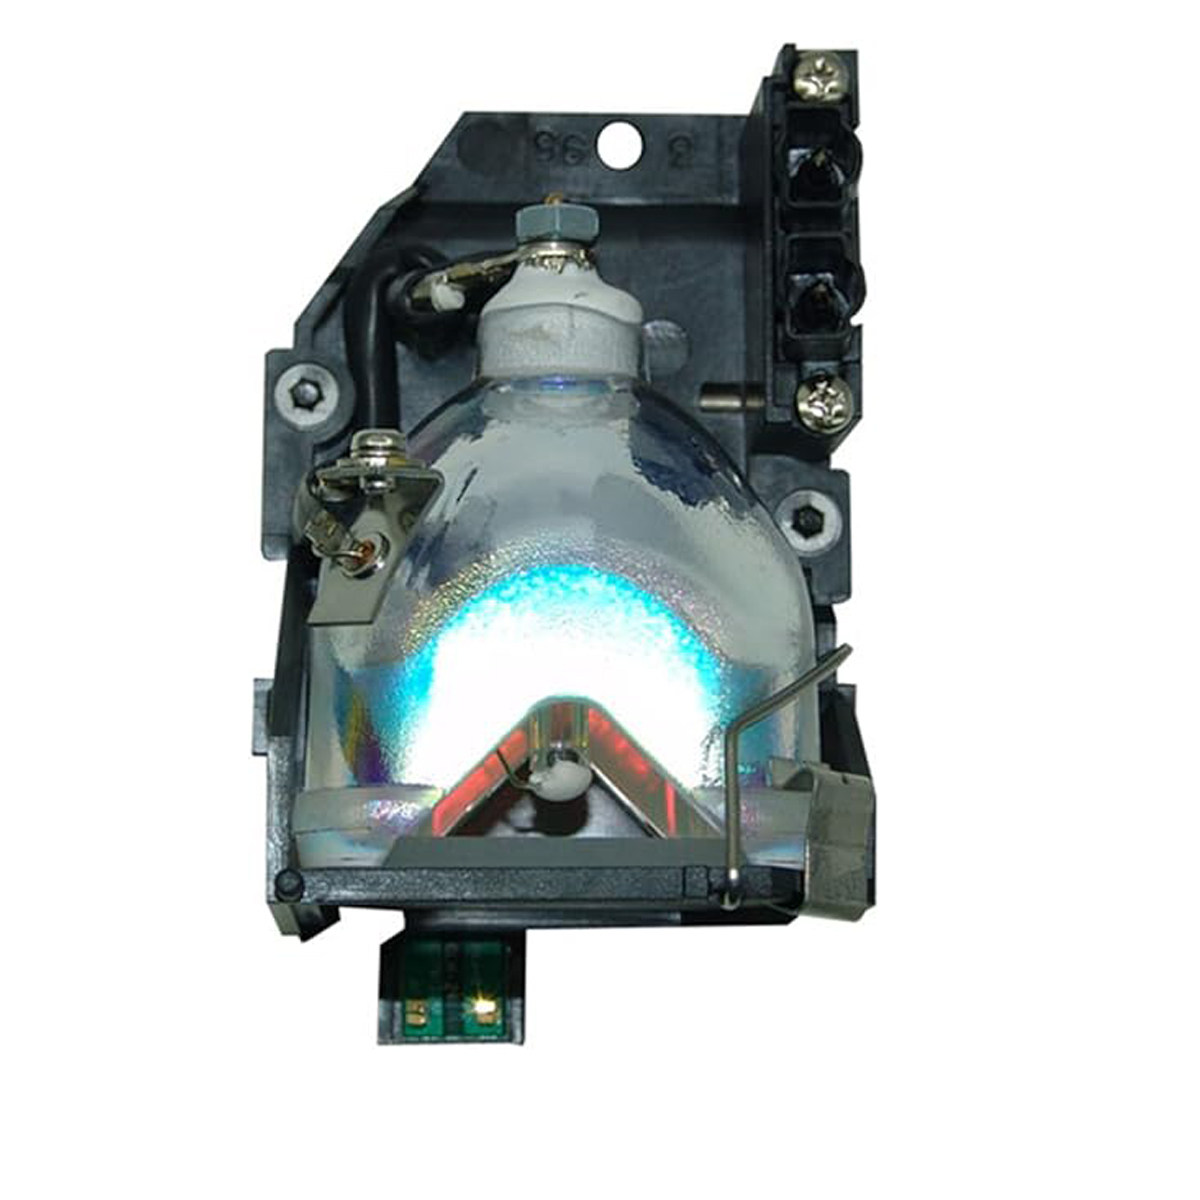 Replacement Projector lamp ELPLP10B For Epson EMP-500 /EMP-700 /POWERLITE 500